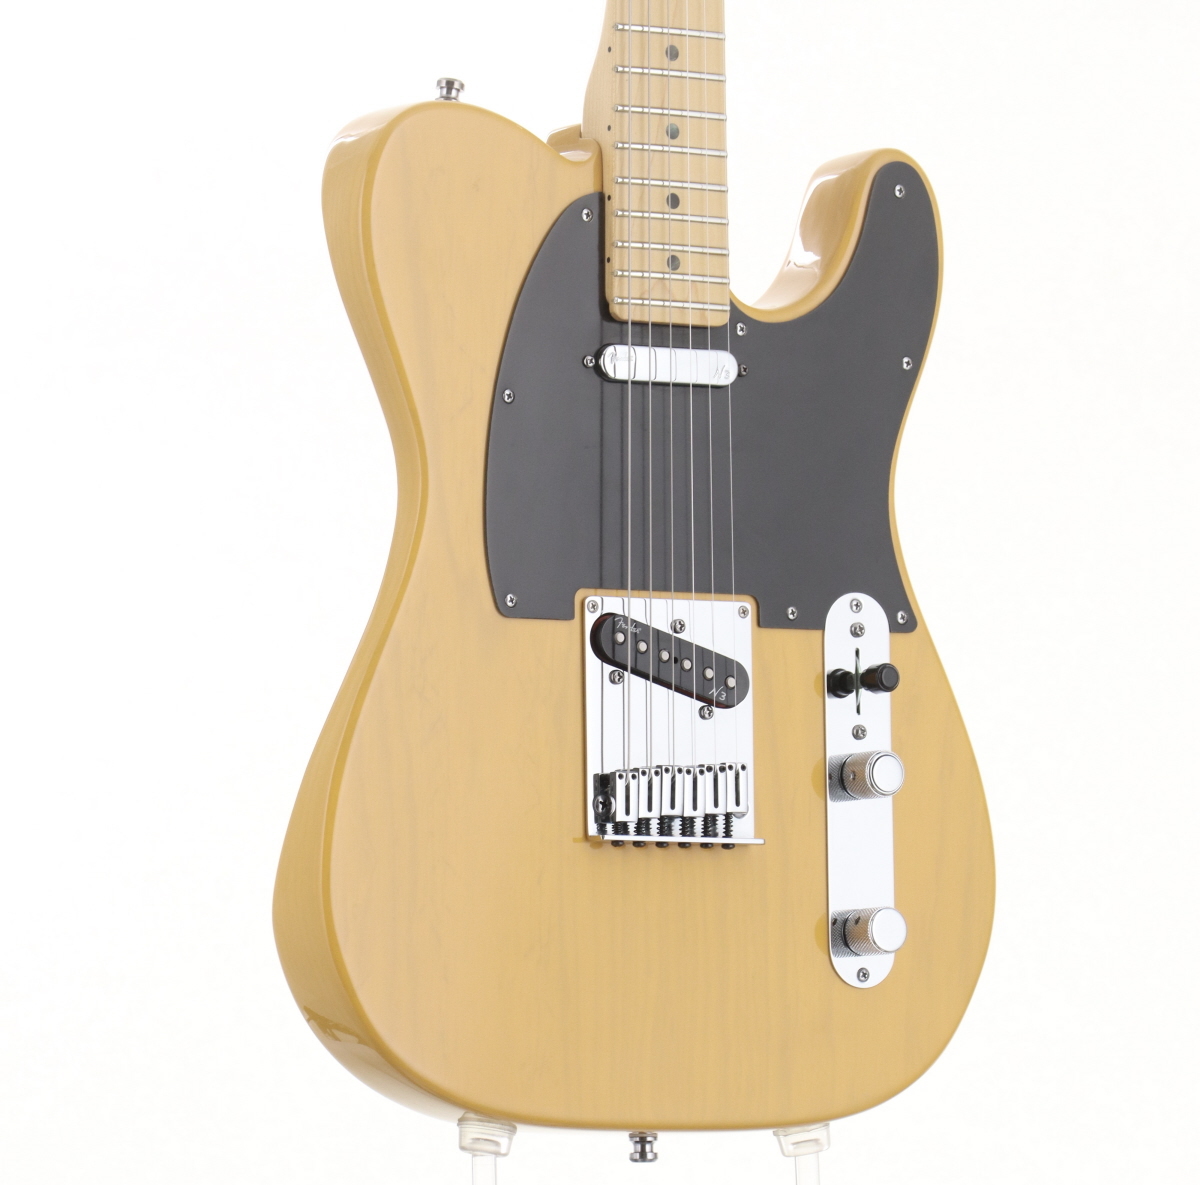 Fender American Deluxe Telecaster N3 Ash Butterscotch Blonde  2014年製【横浜店】（中古/送料無料）【楽器検索デジマート】